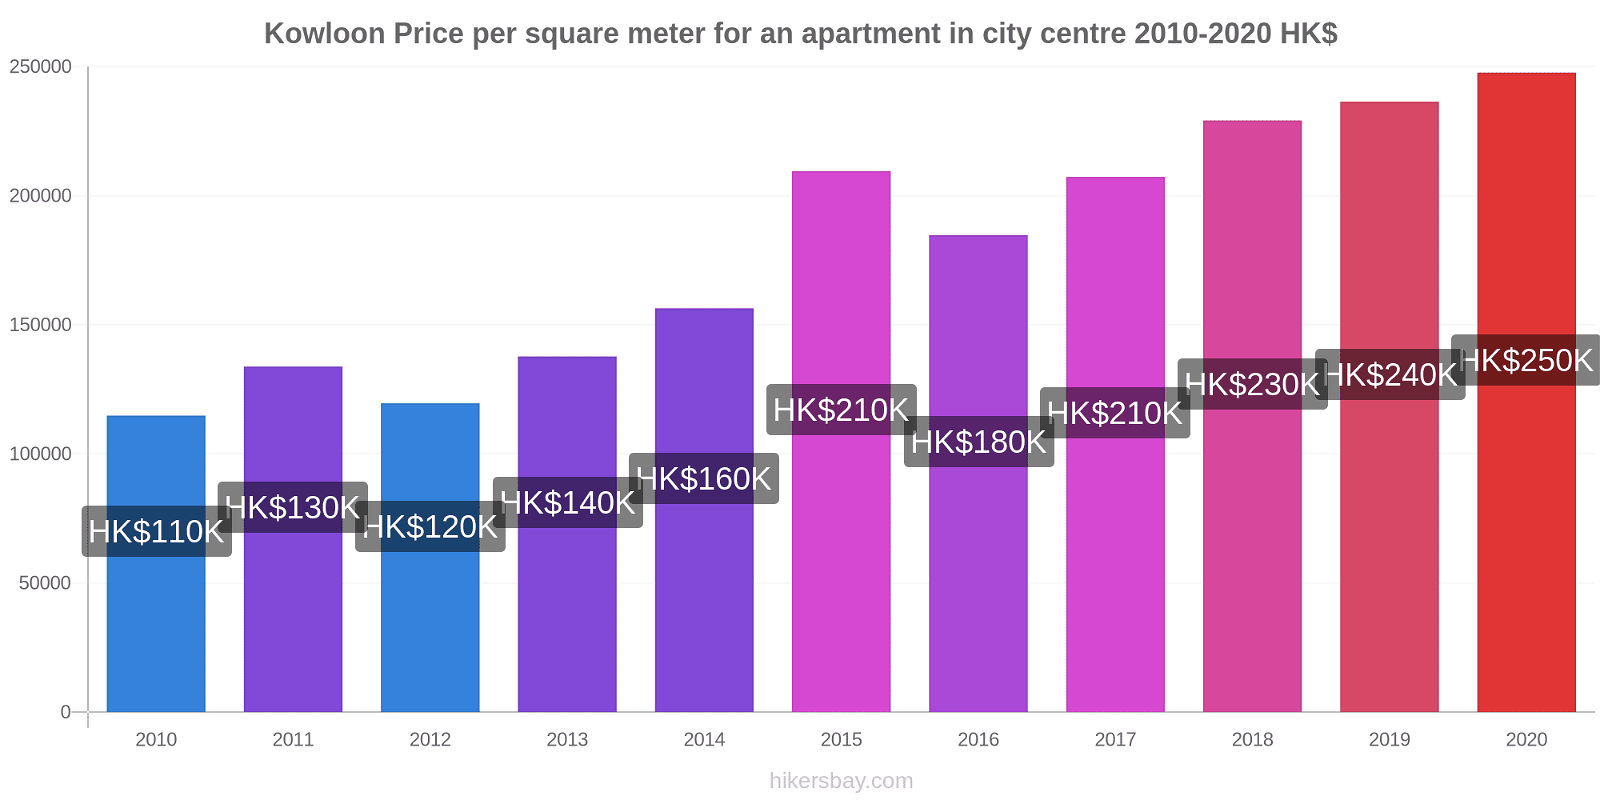 Kowloon price changes Price per square meter for an apartment in city centre hikersbay.com